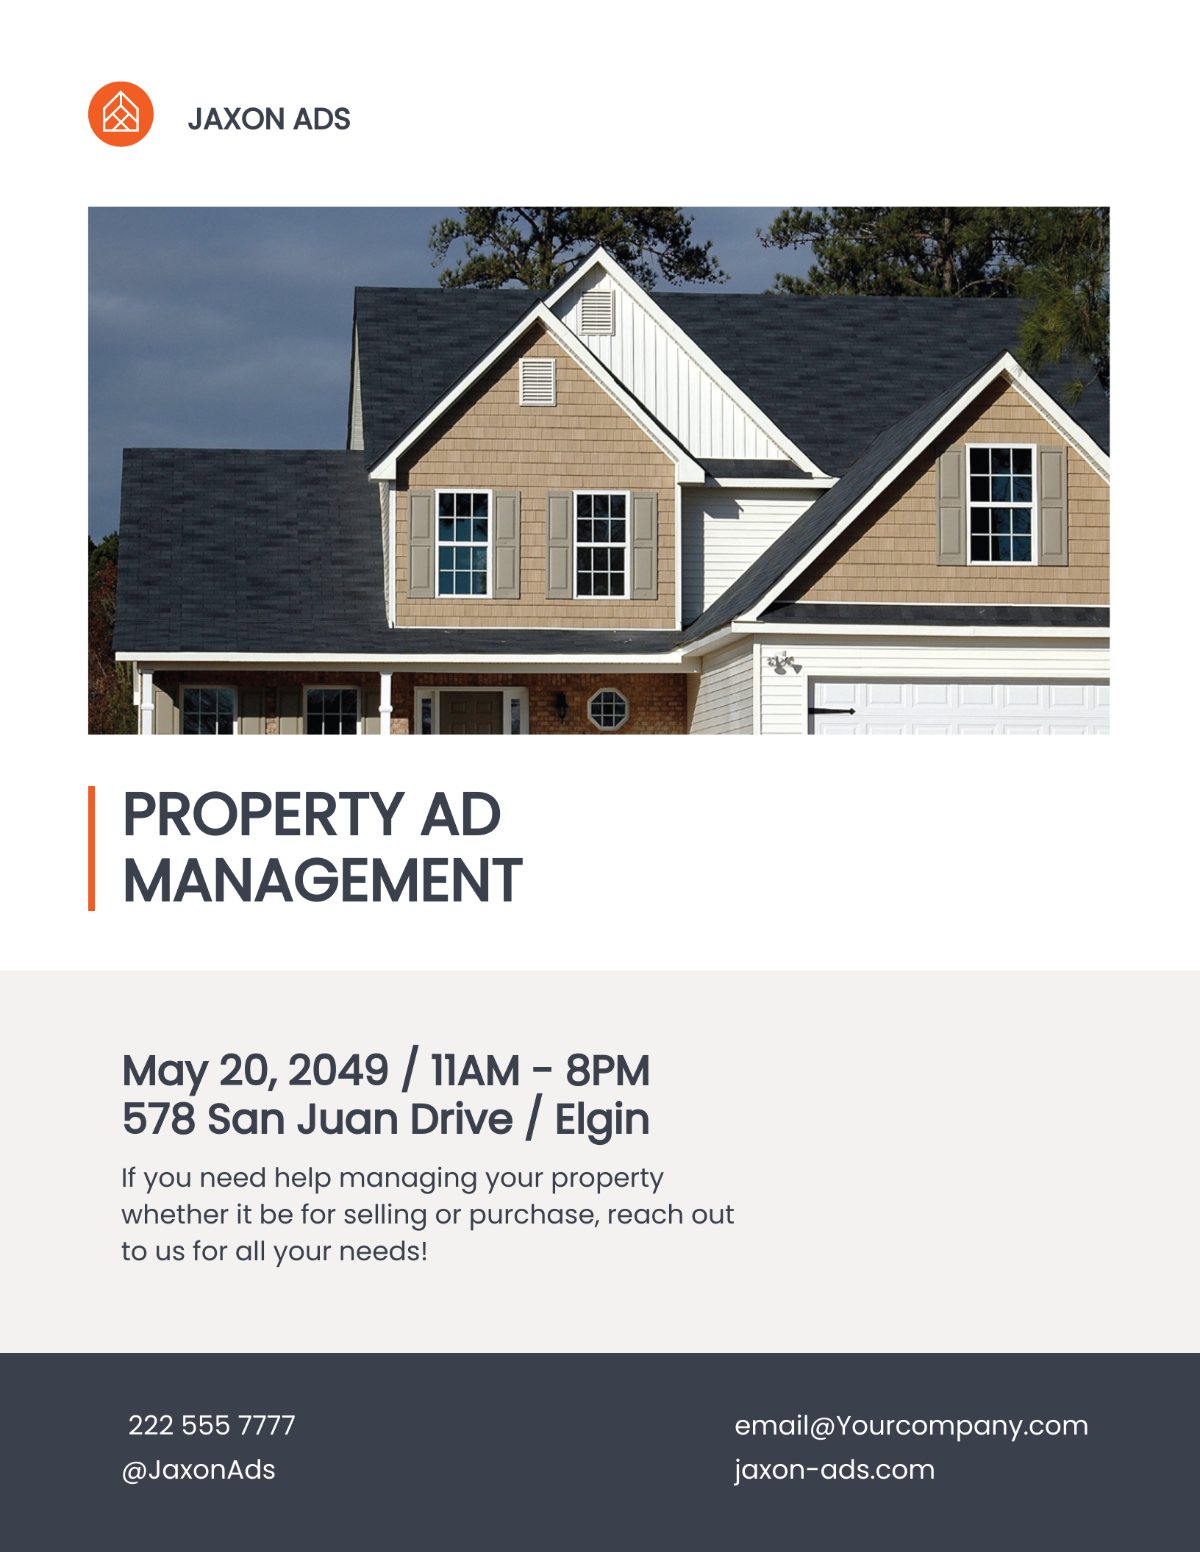 Property Management Advertising Flyer Template